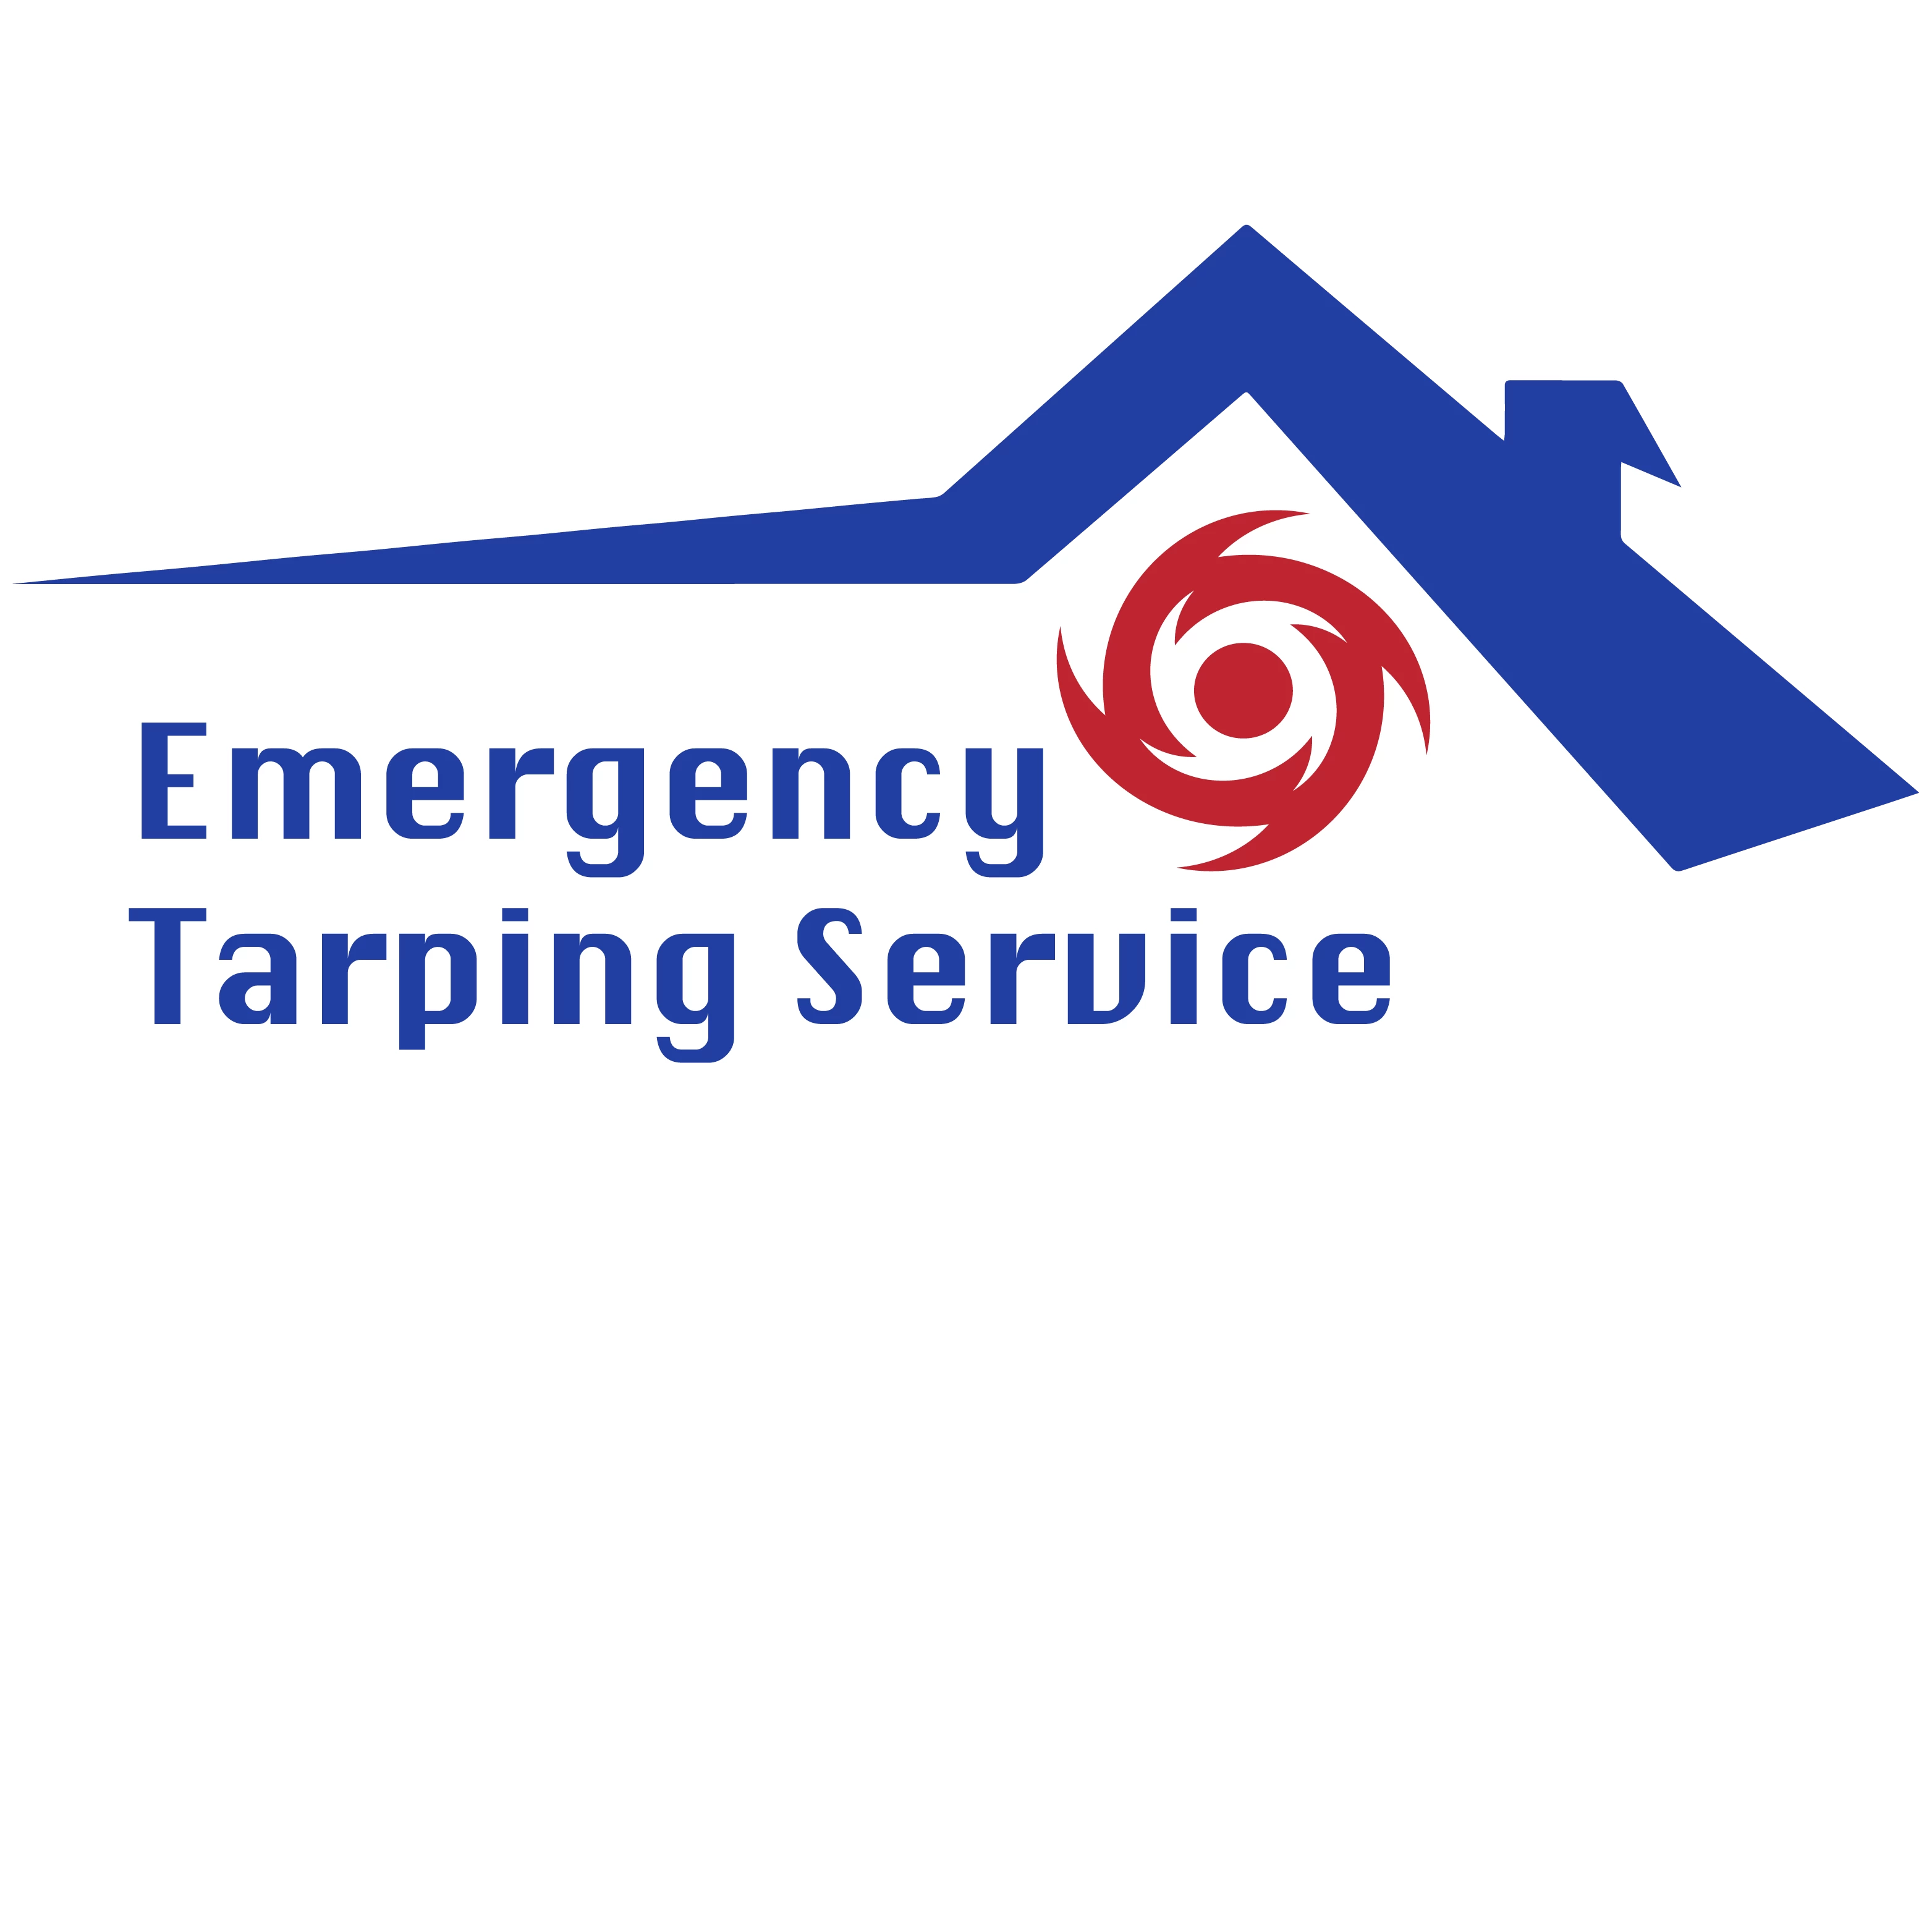 Rodger Roofing Consultant logo